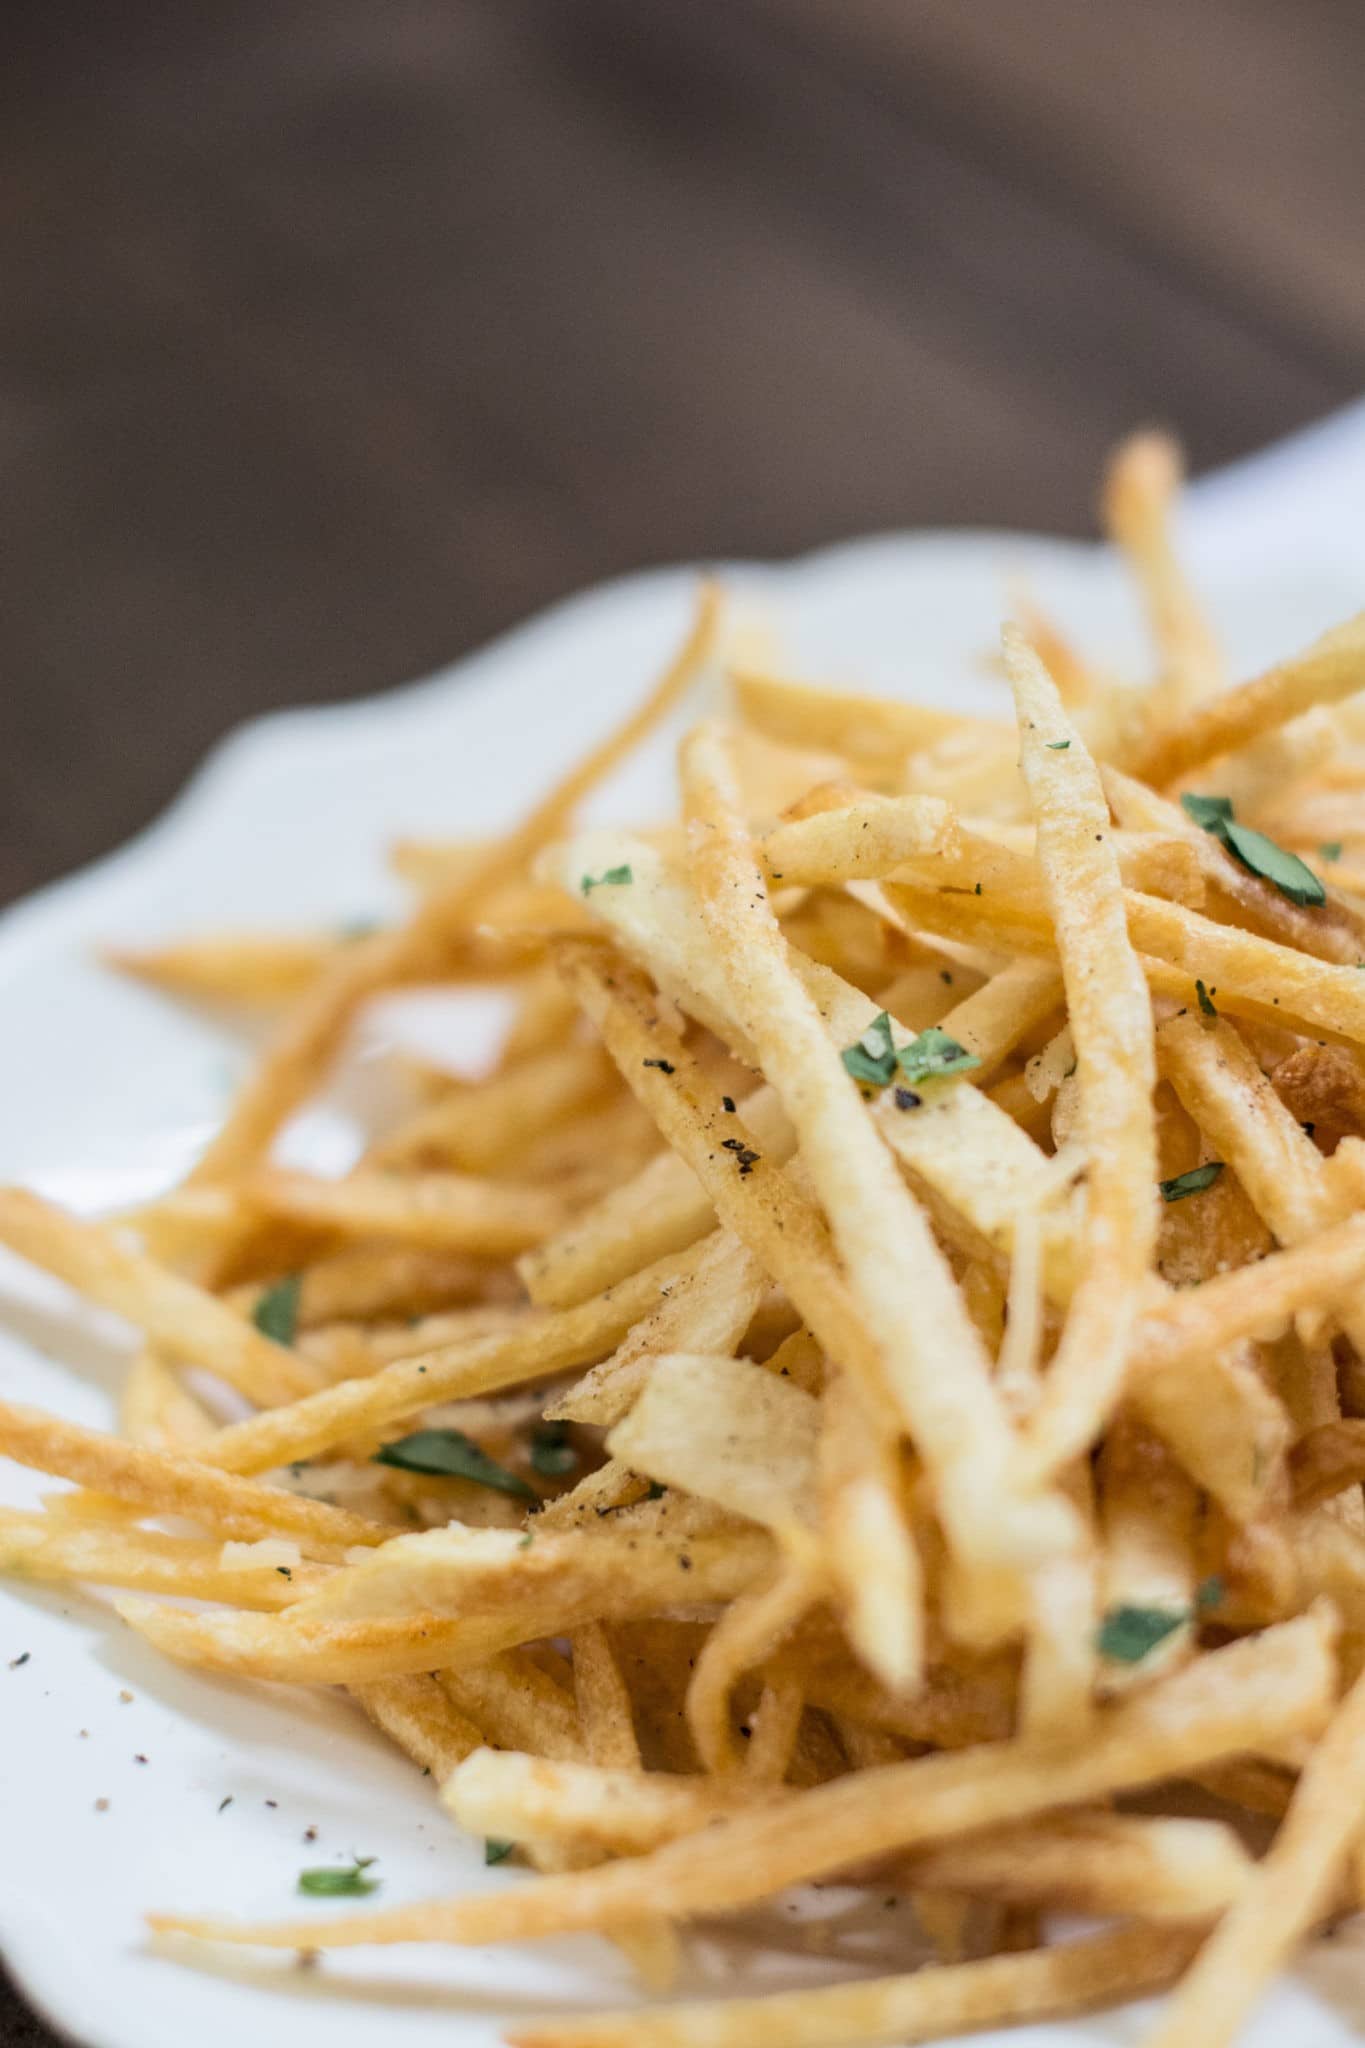 Enjoying these shoestring style French Fries! Find the recipe @LittleFiggyFood